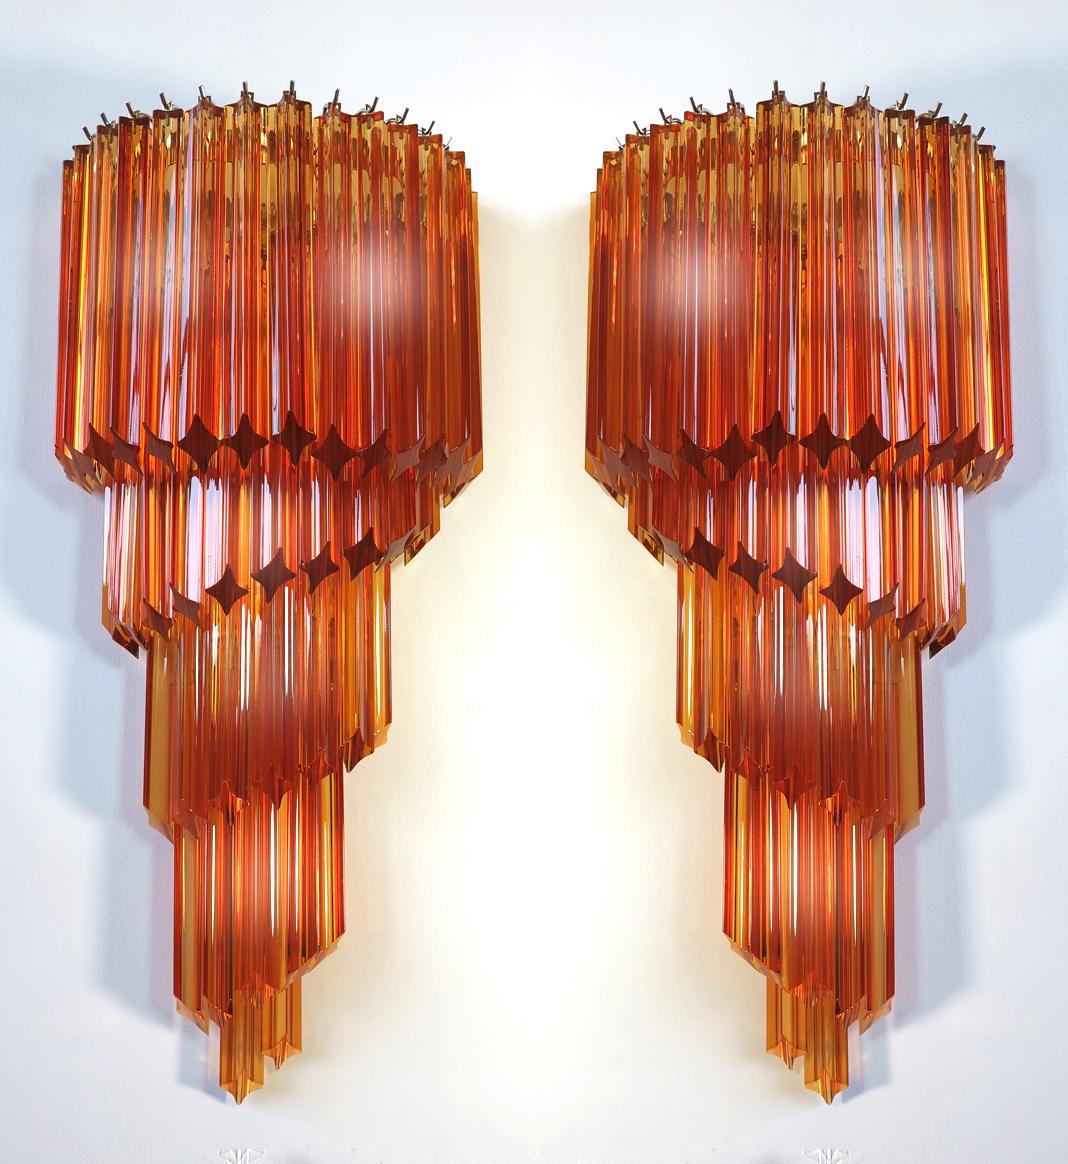 Pair of Venetian Wall Sconces, Murano, 1980s In Excellent Condition For Sale In Budapest, HU